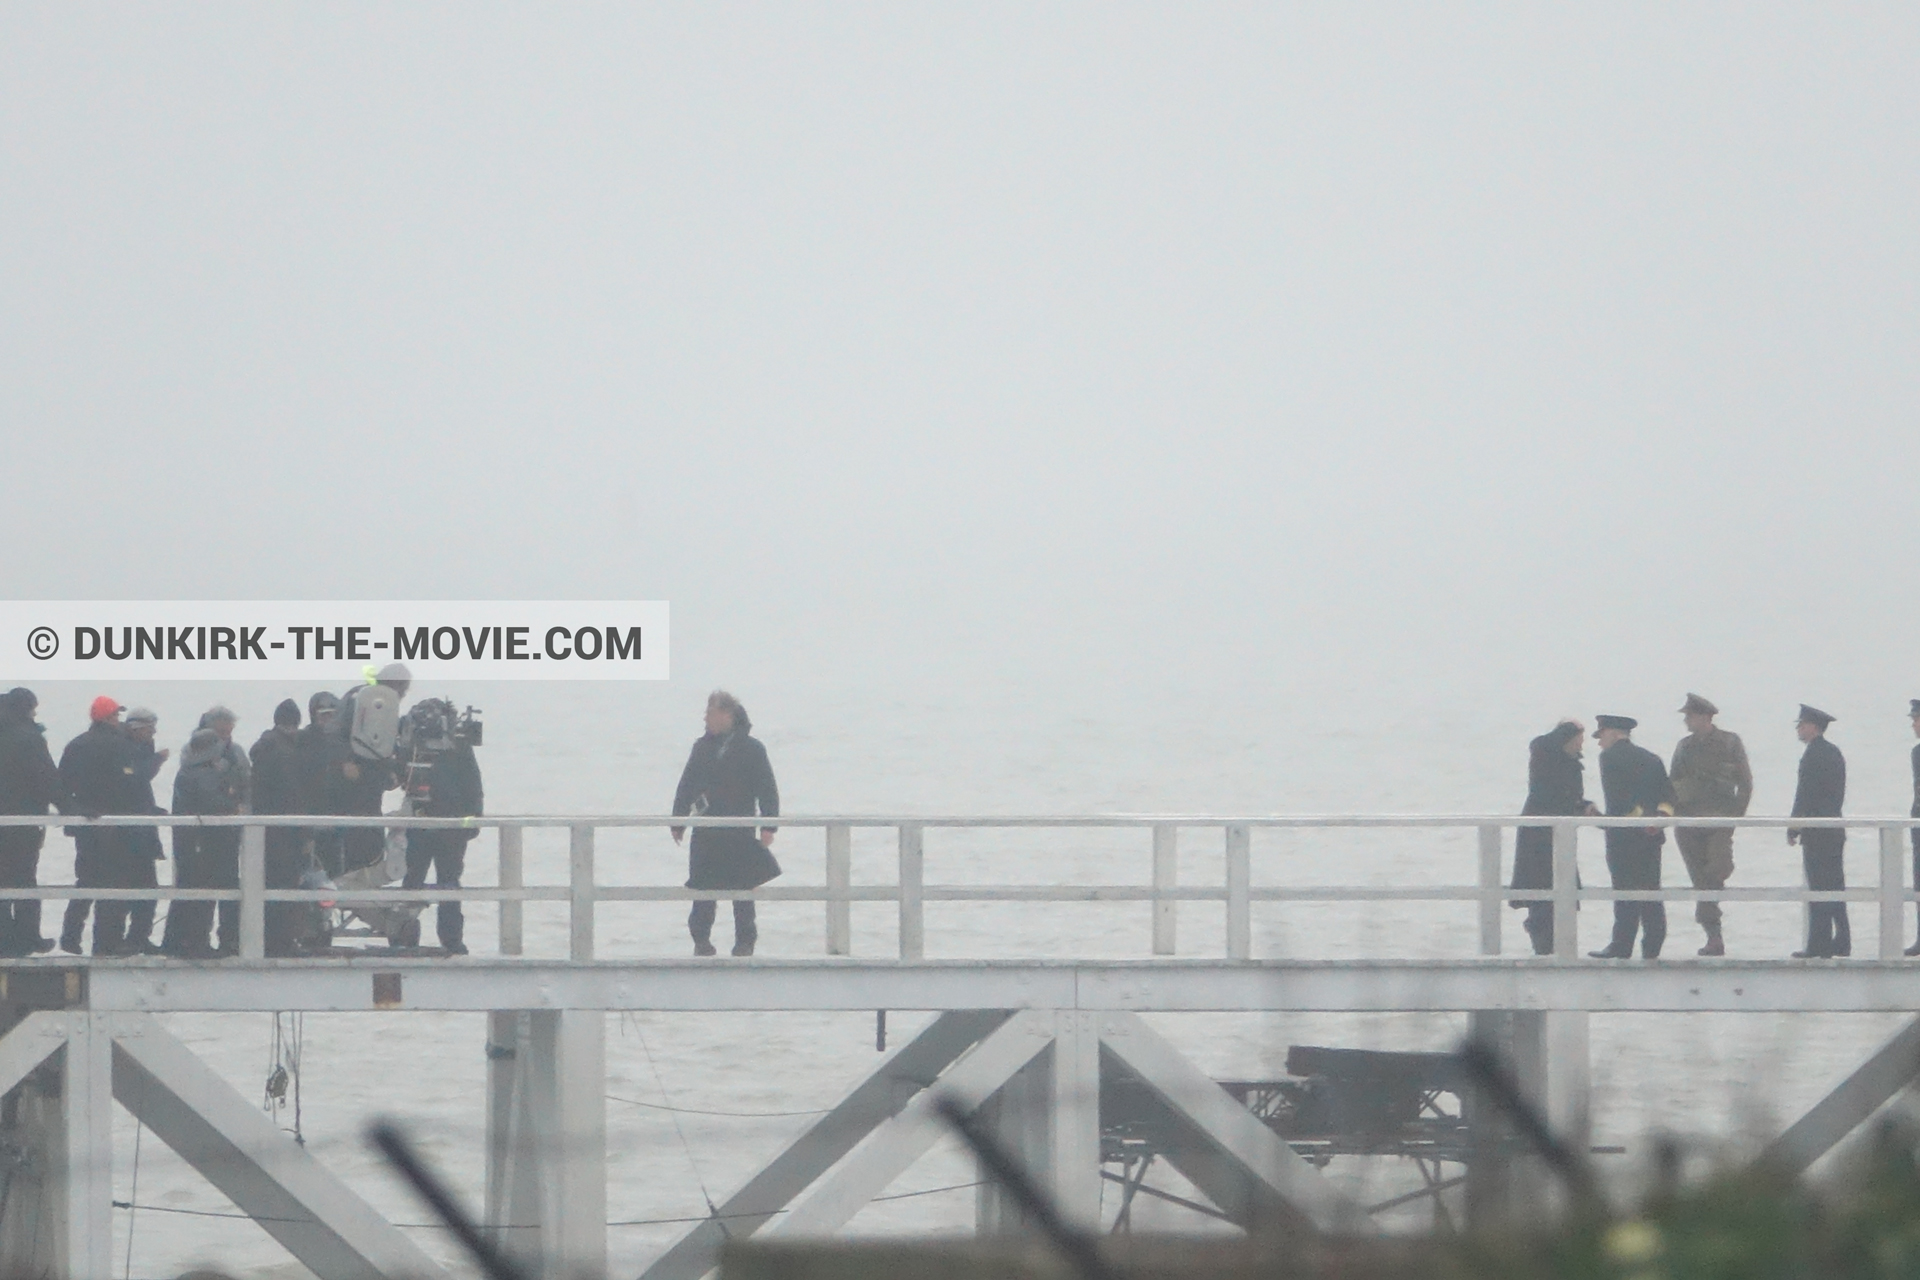 Picture with actor, grey sky, EST pier, technical team,  from behind the scene of the Dunkirk movie by Nolan